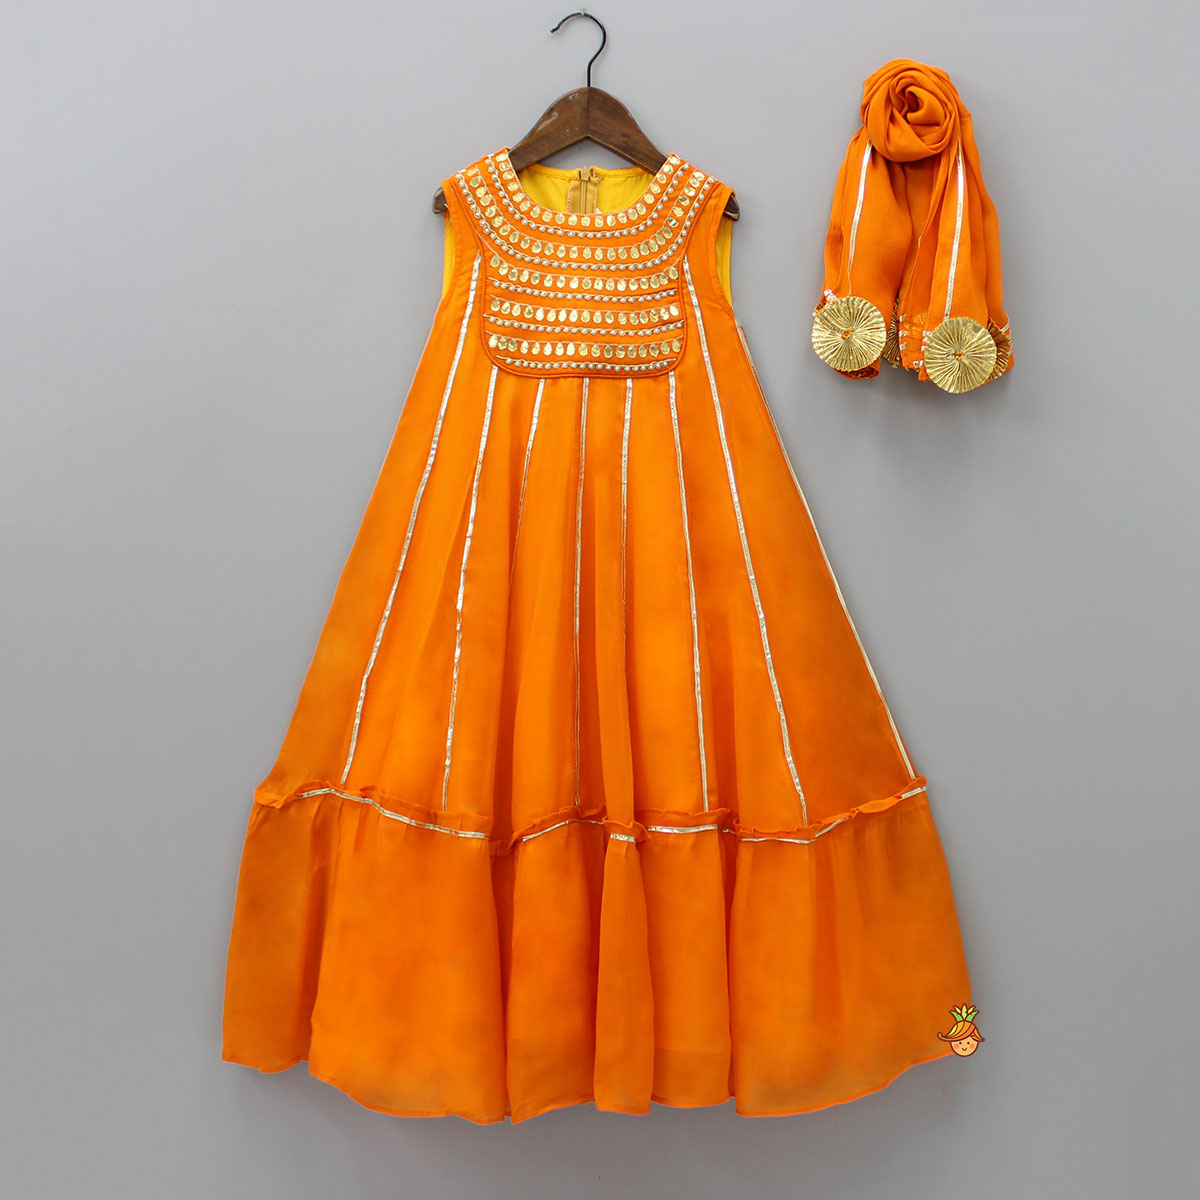 Best Diwali Clothes for Babies by Pink Blue India at Coroflot.com